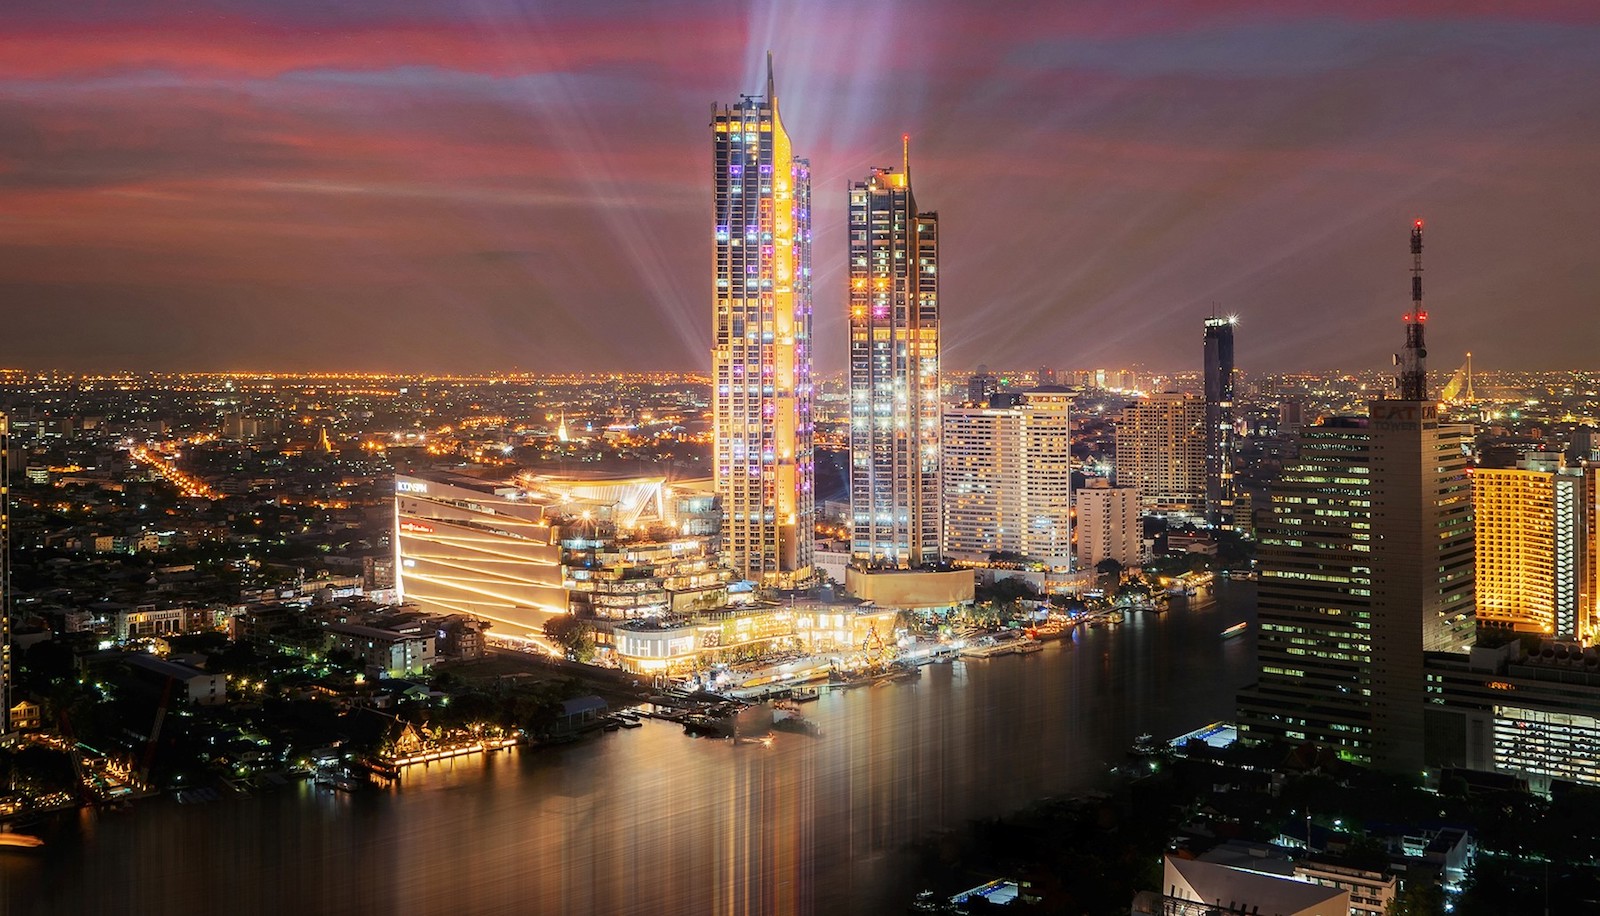 IconSiam - Top 10 places to go shopping in Bangkok